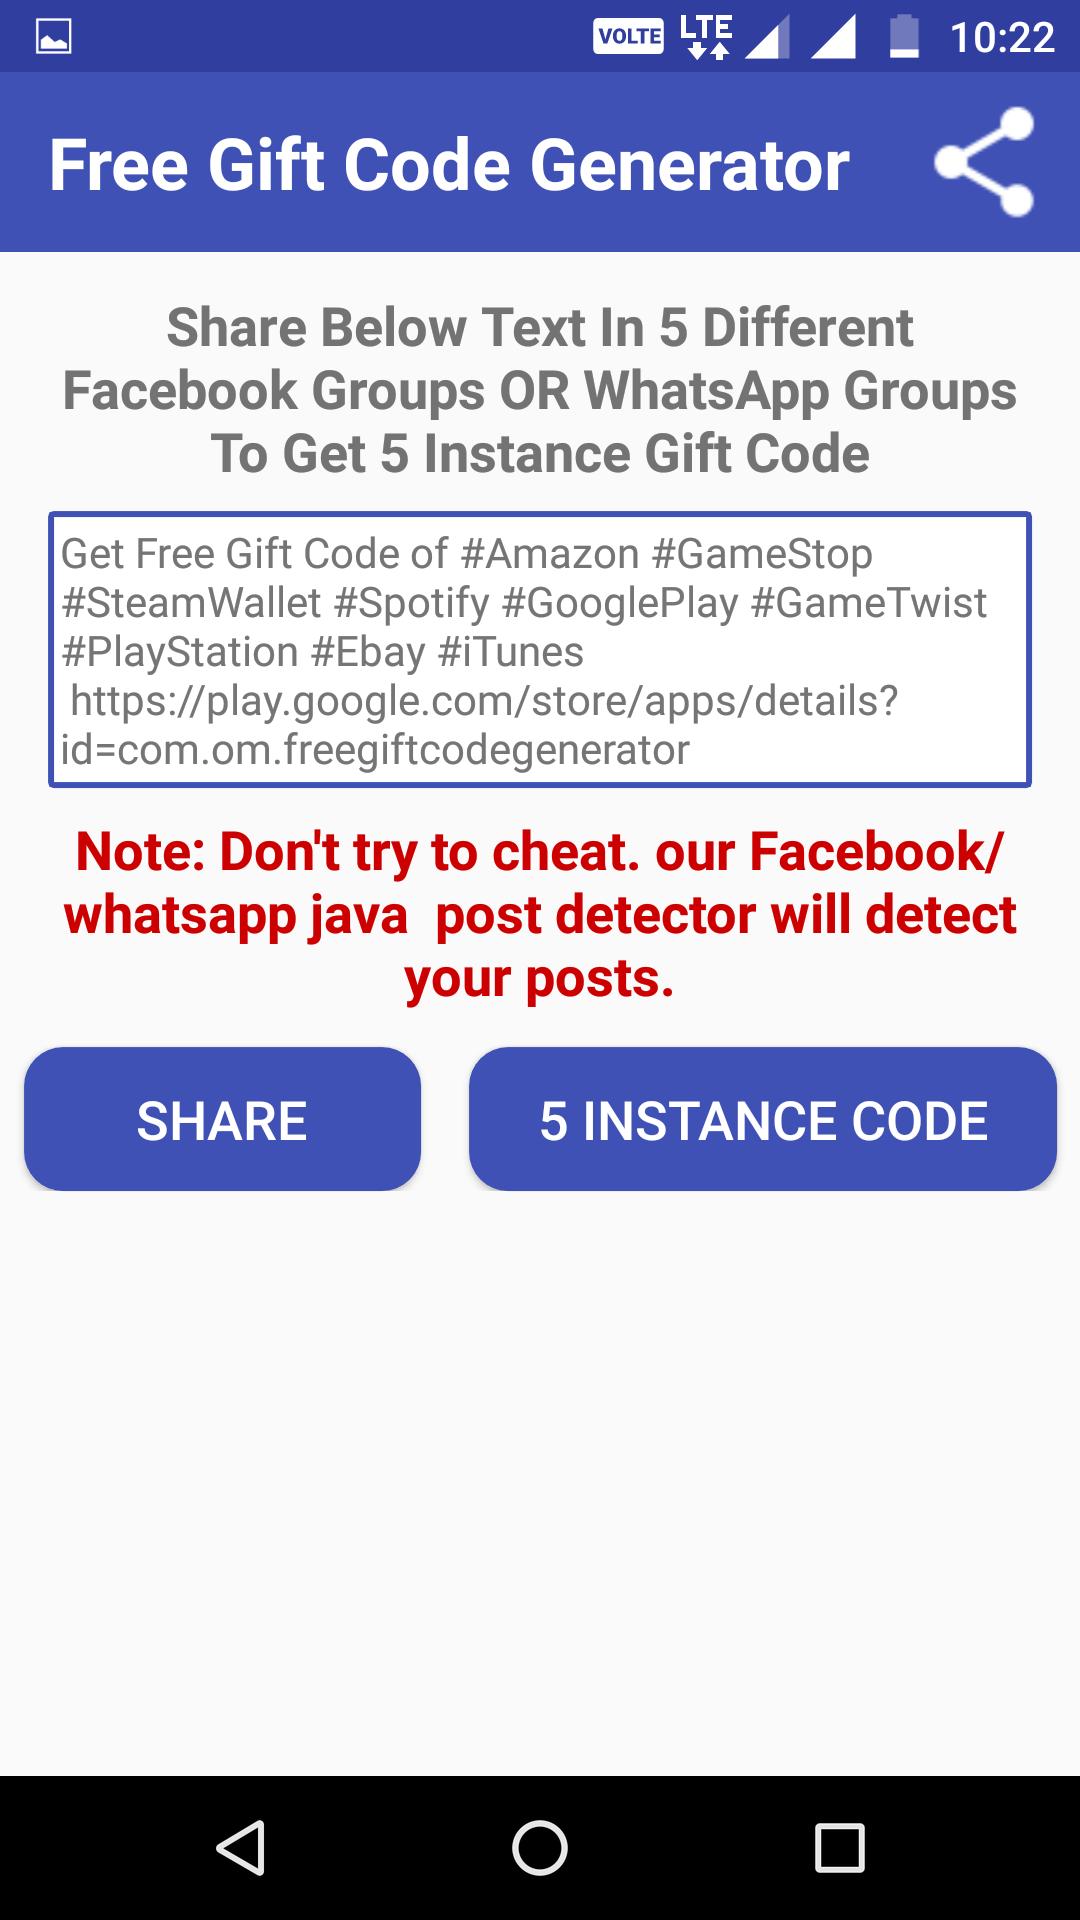 Free Gift Code Generator for Android - APK Download